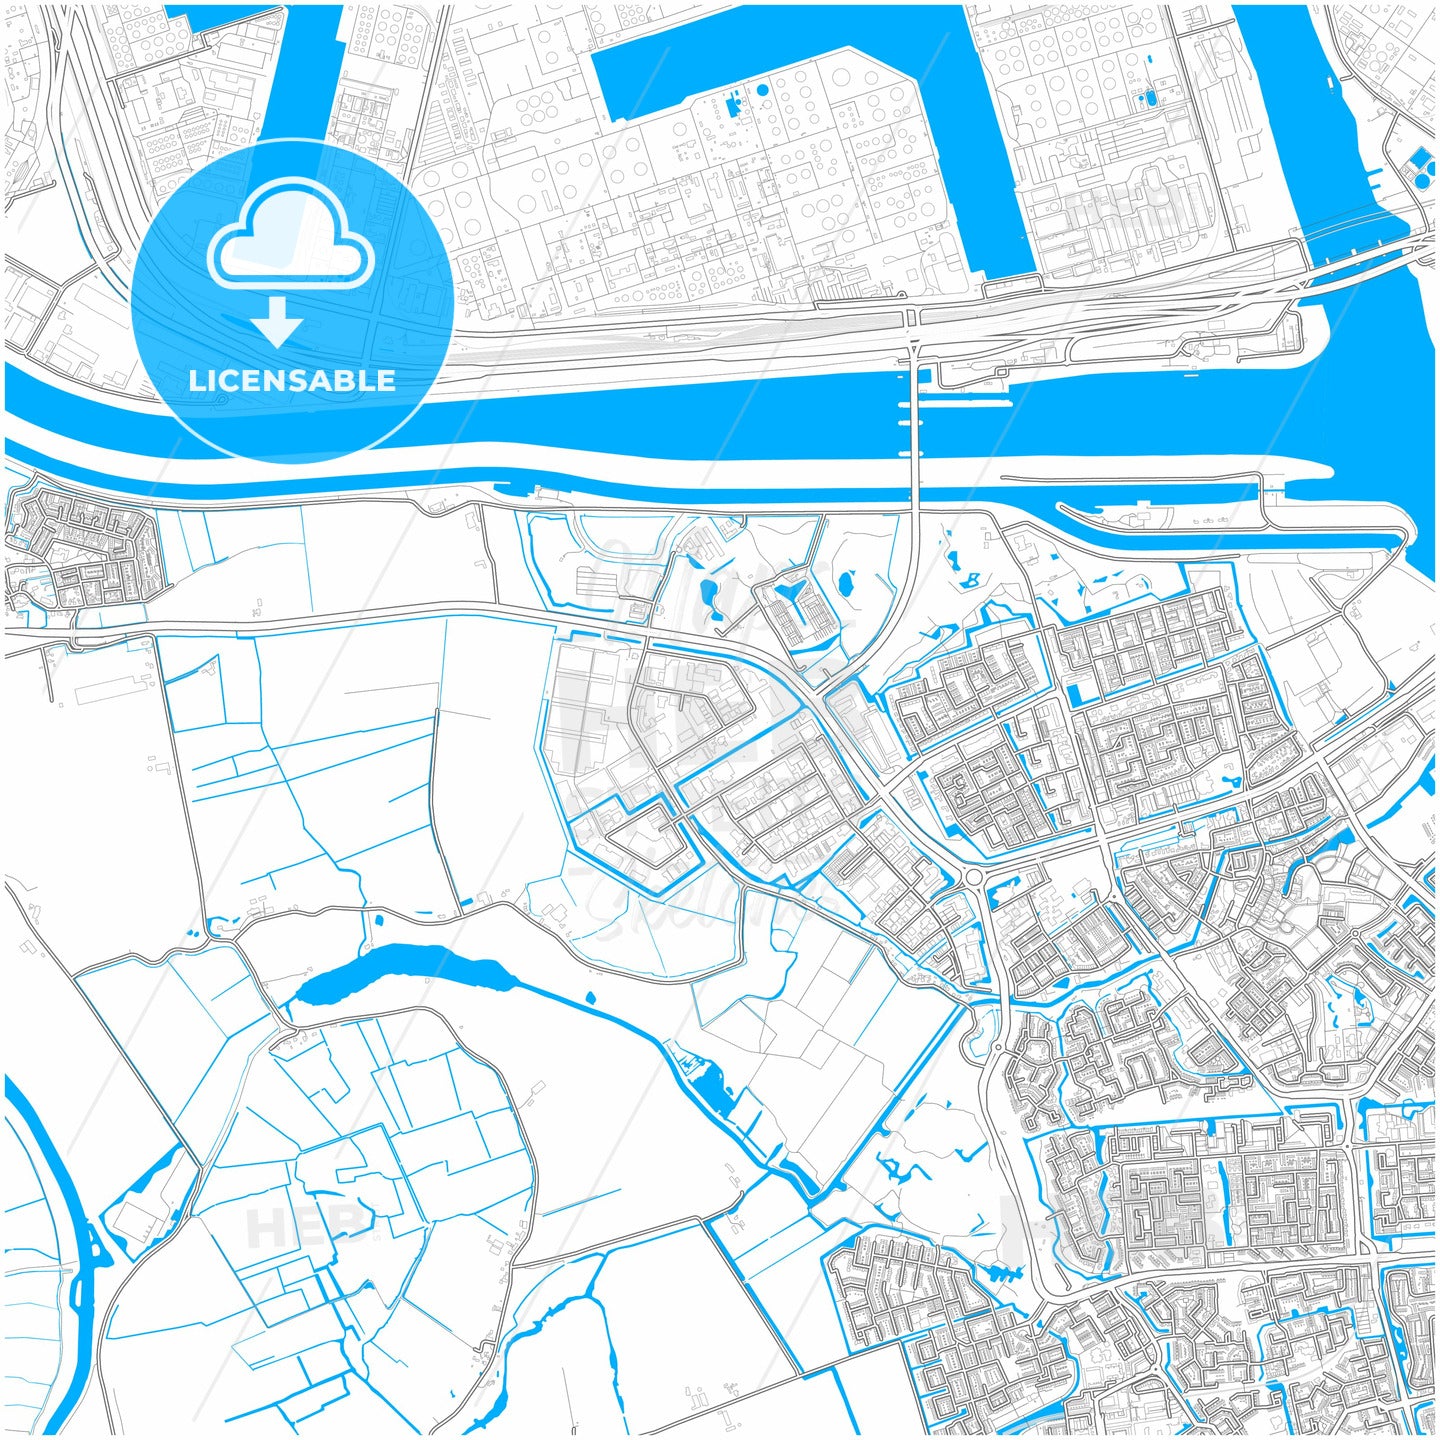 Nissewaard, South Holland, Netherlands, city map with high quality roads.